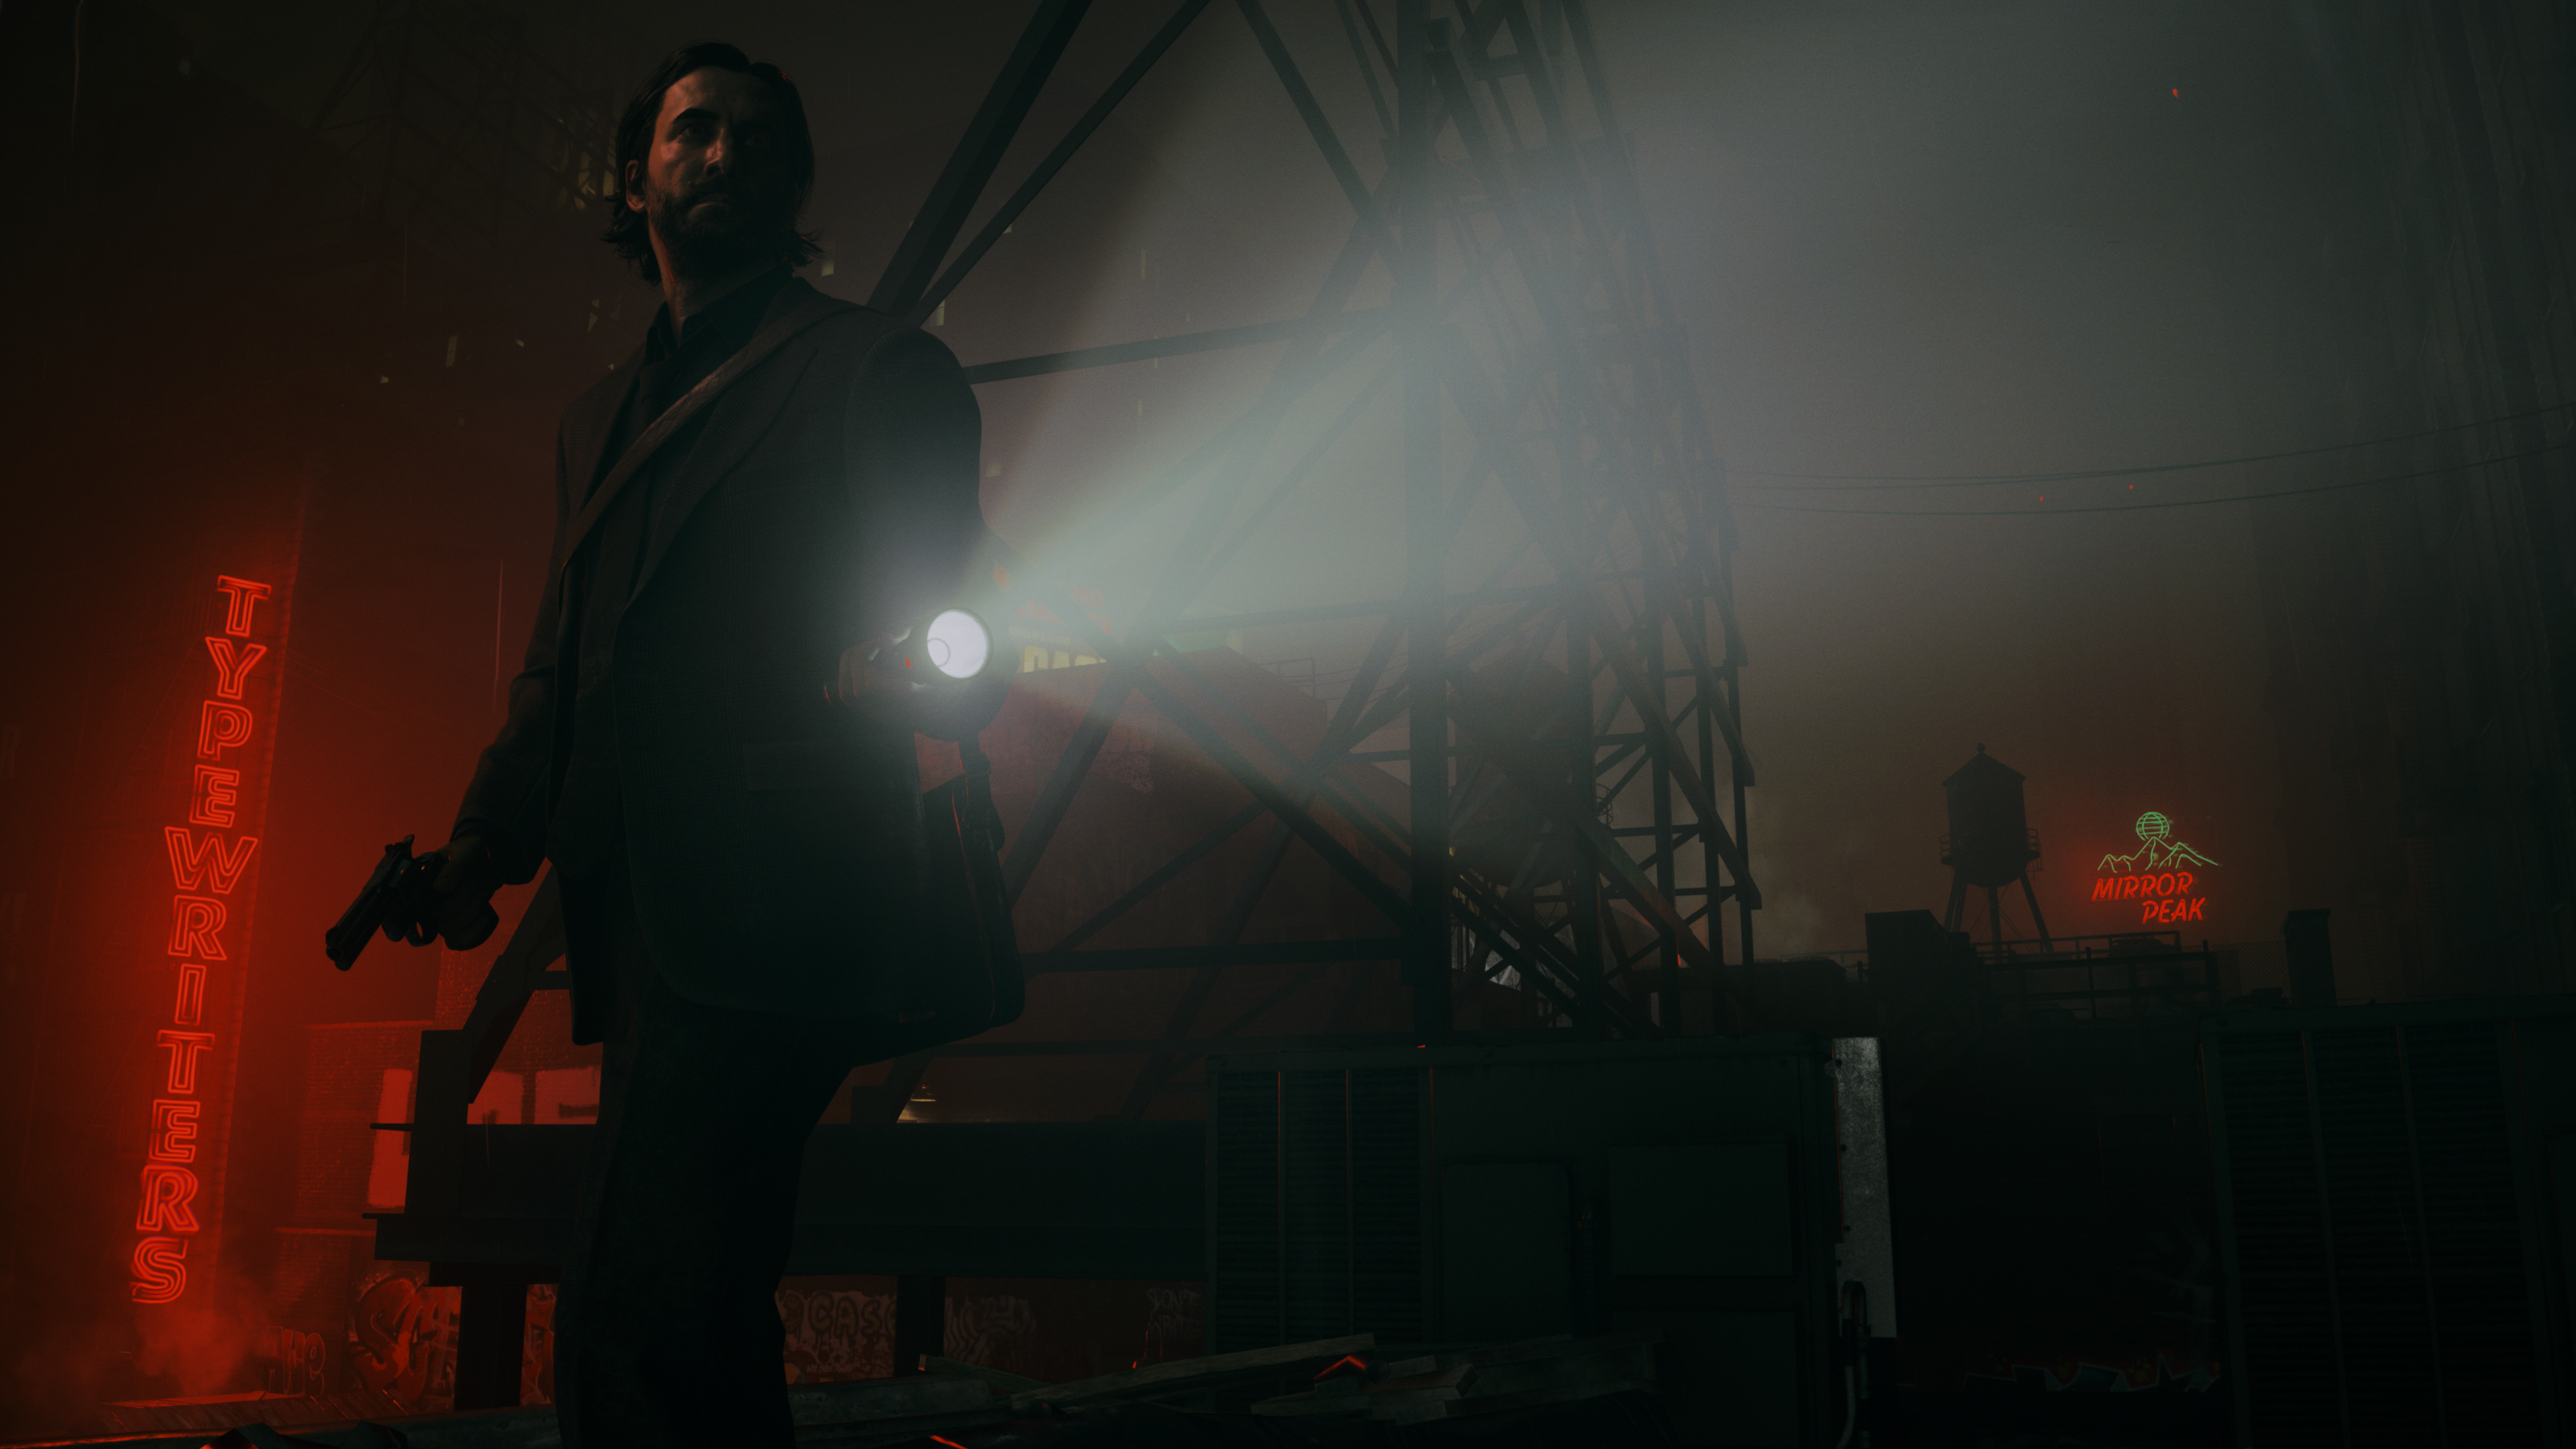 Alan Wake 2 revives the story-driven video game – New York Daily News